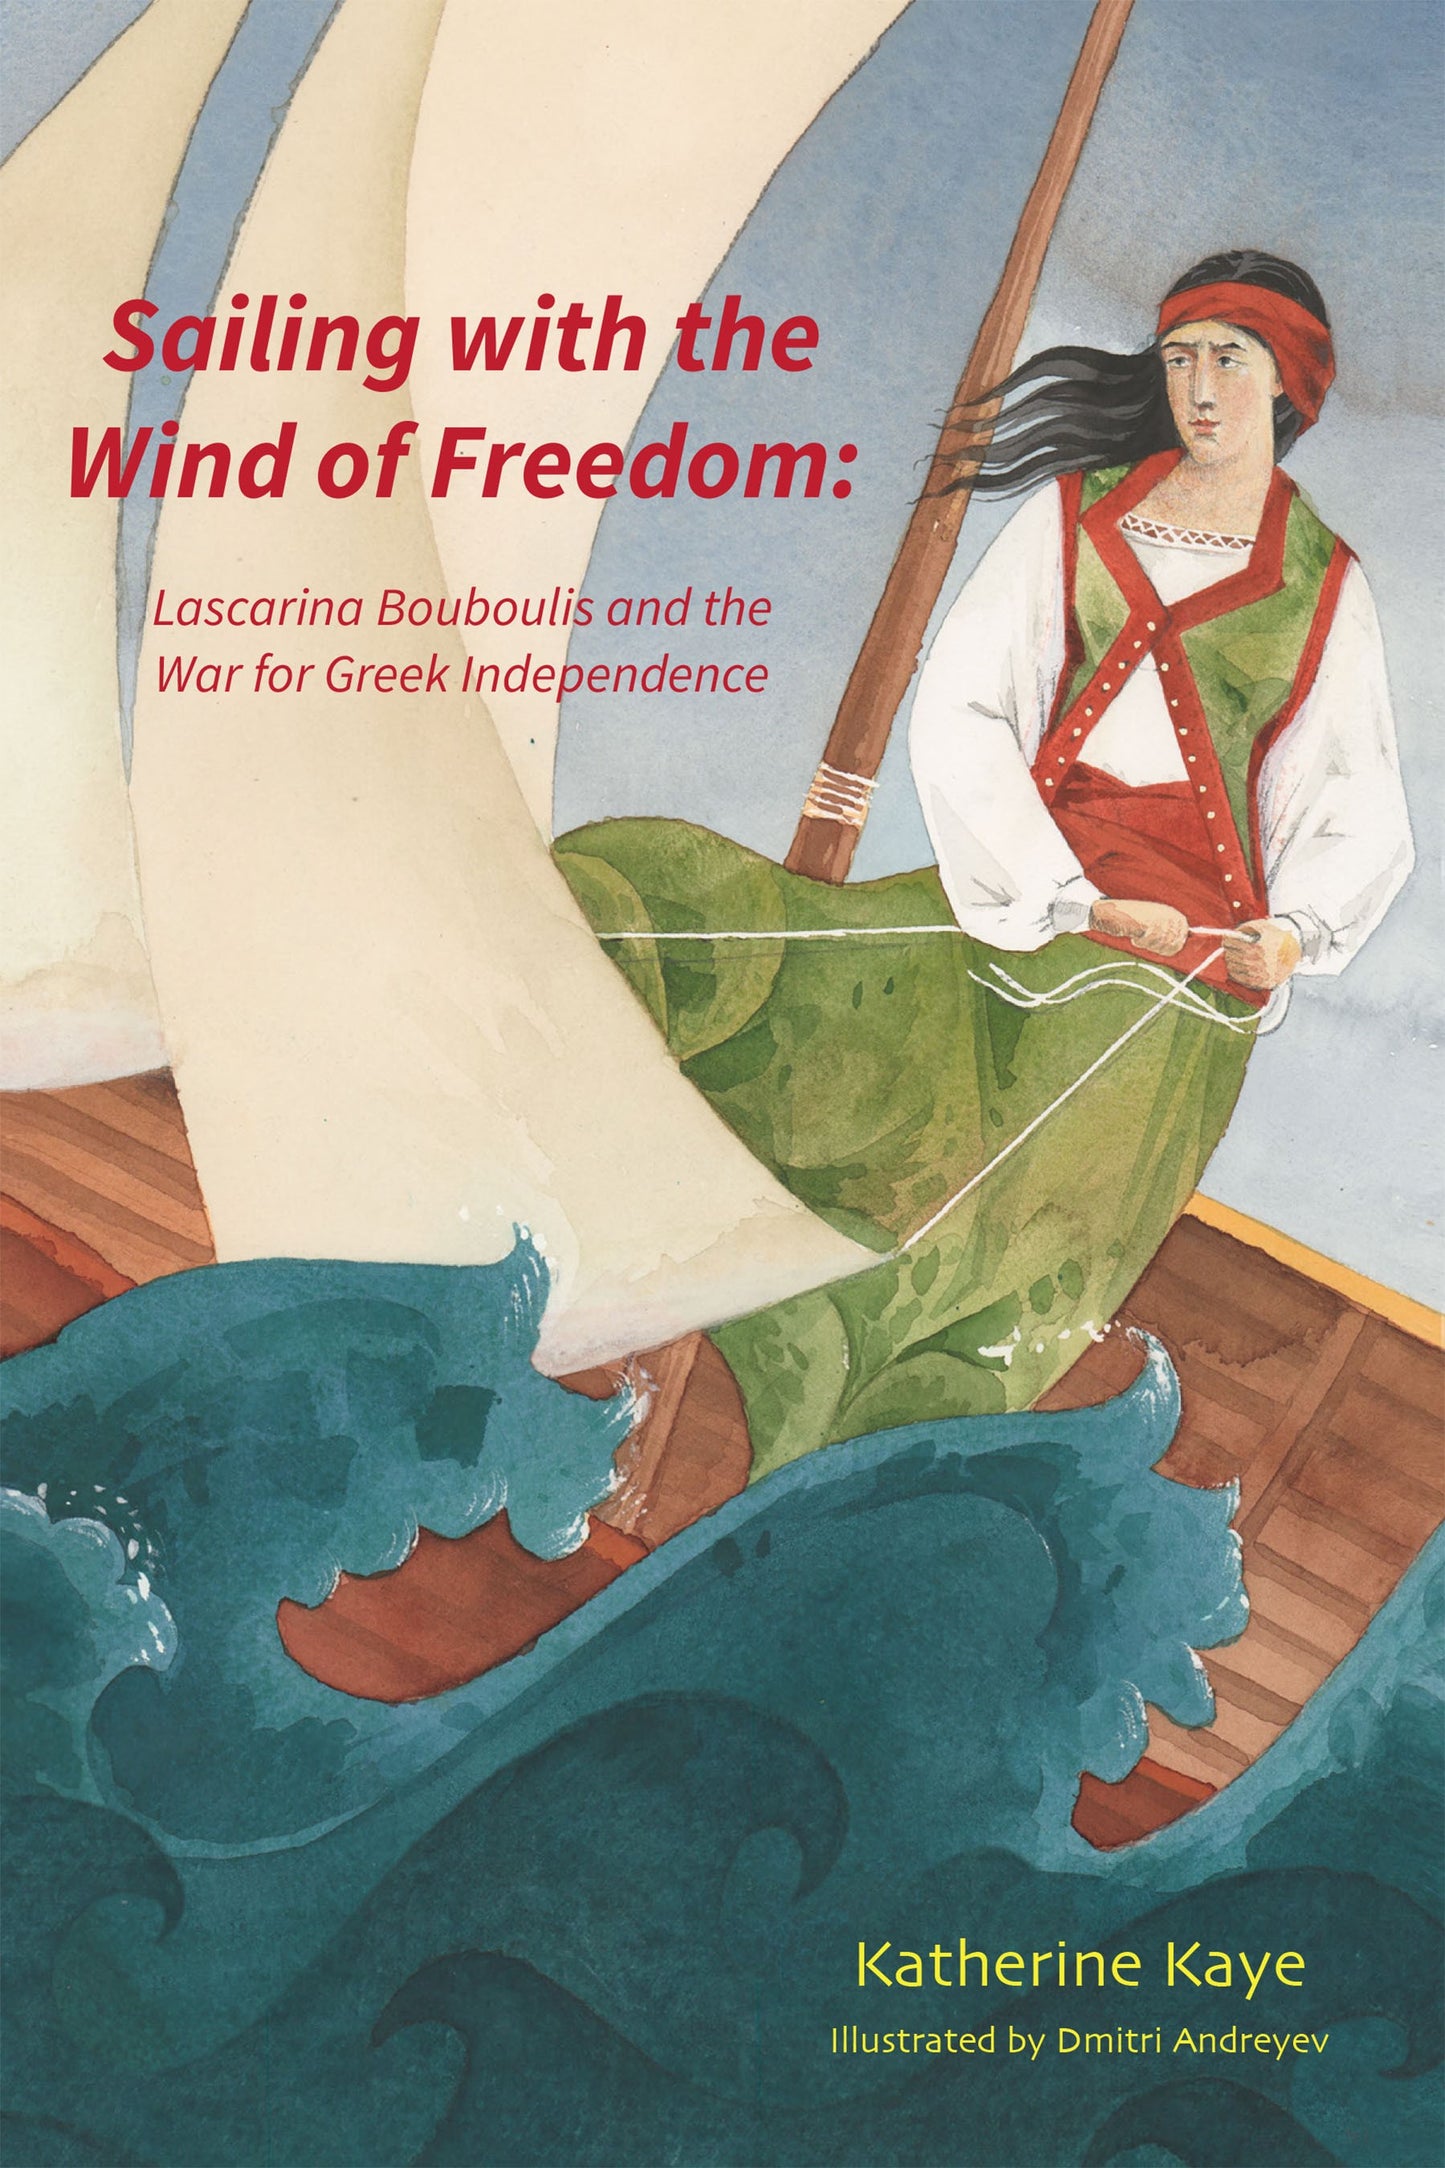 Sailing with the Wind of Freedom: Lascarina Bouboulis and the War for Greek Independence